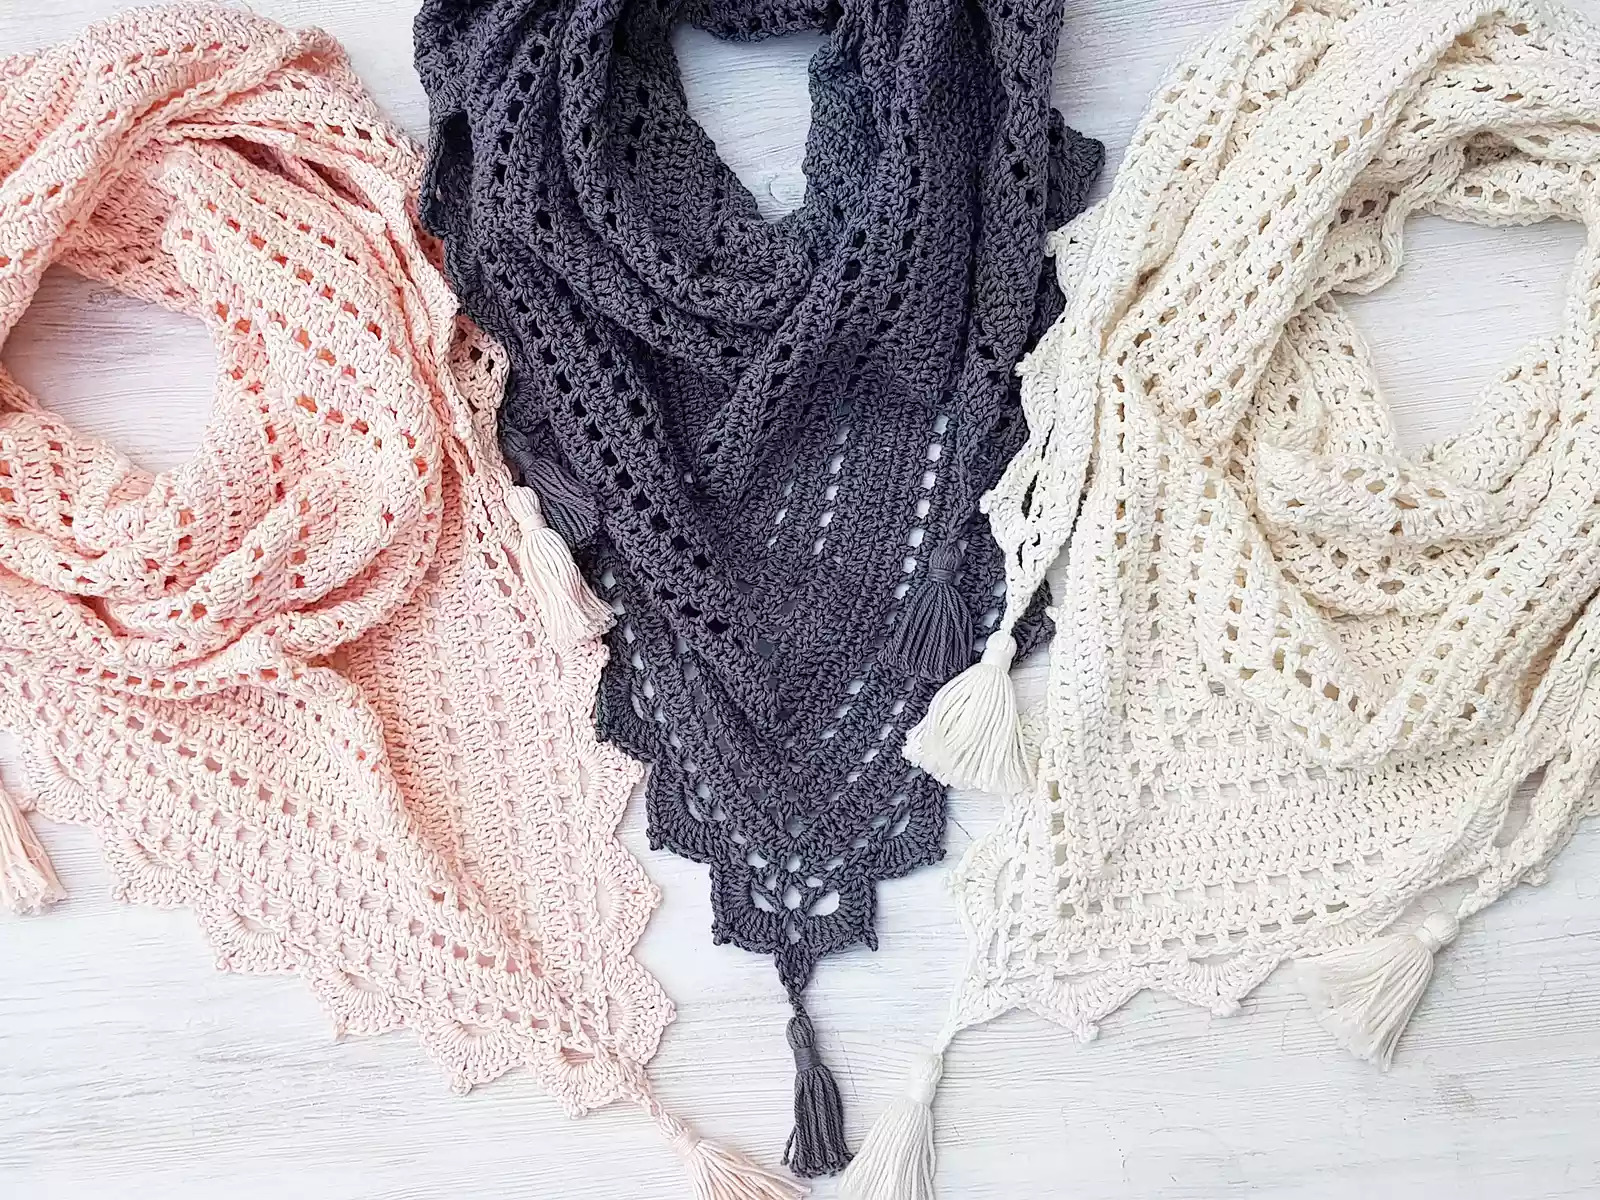 Crochet a Shawl That Doubles as a Scarf